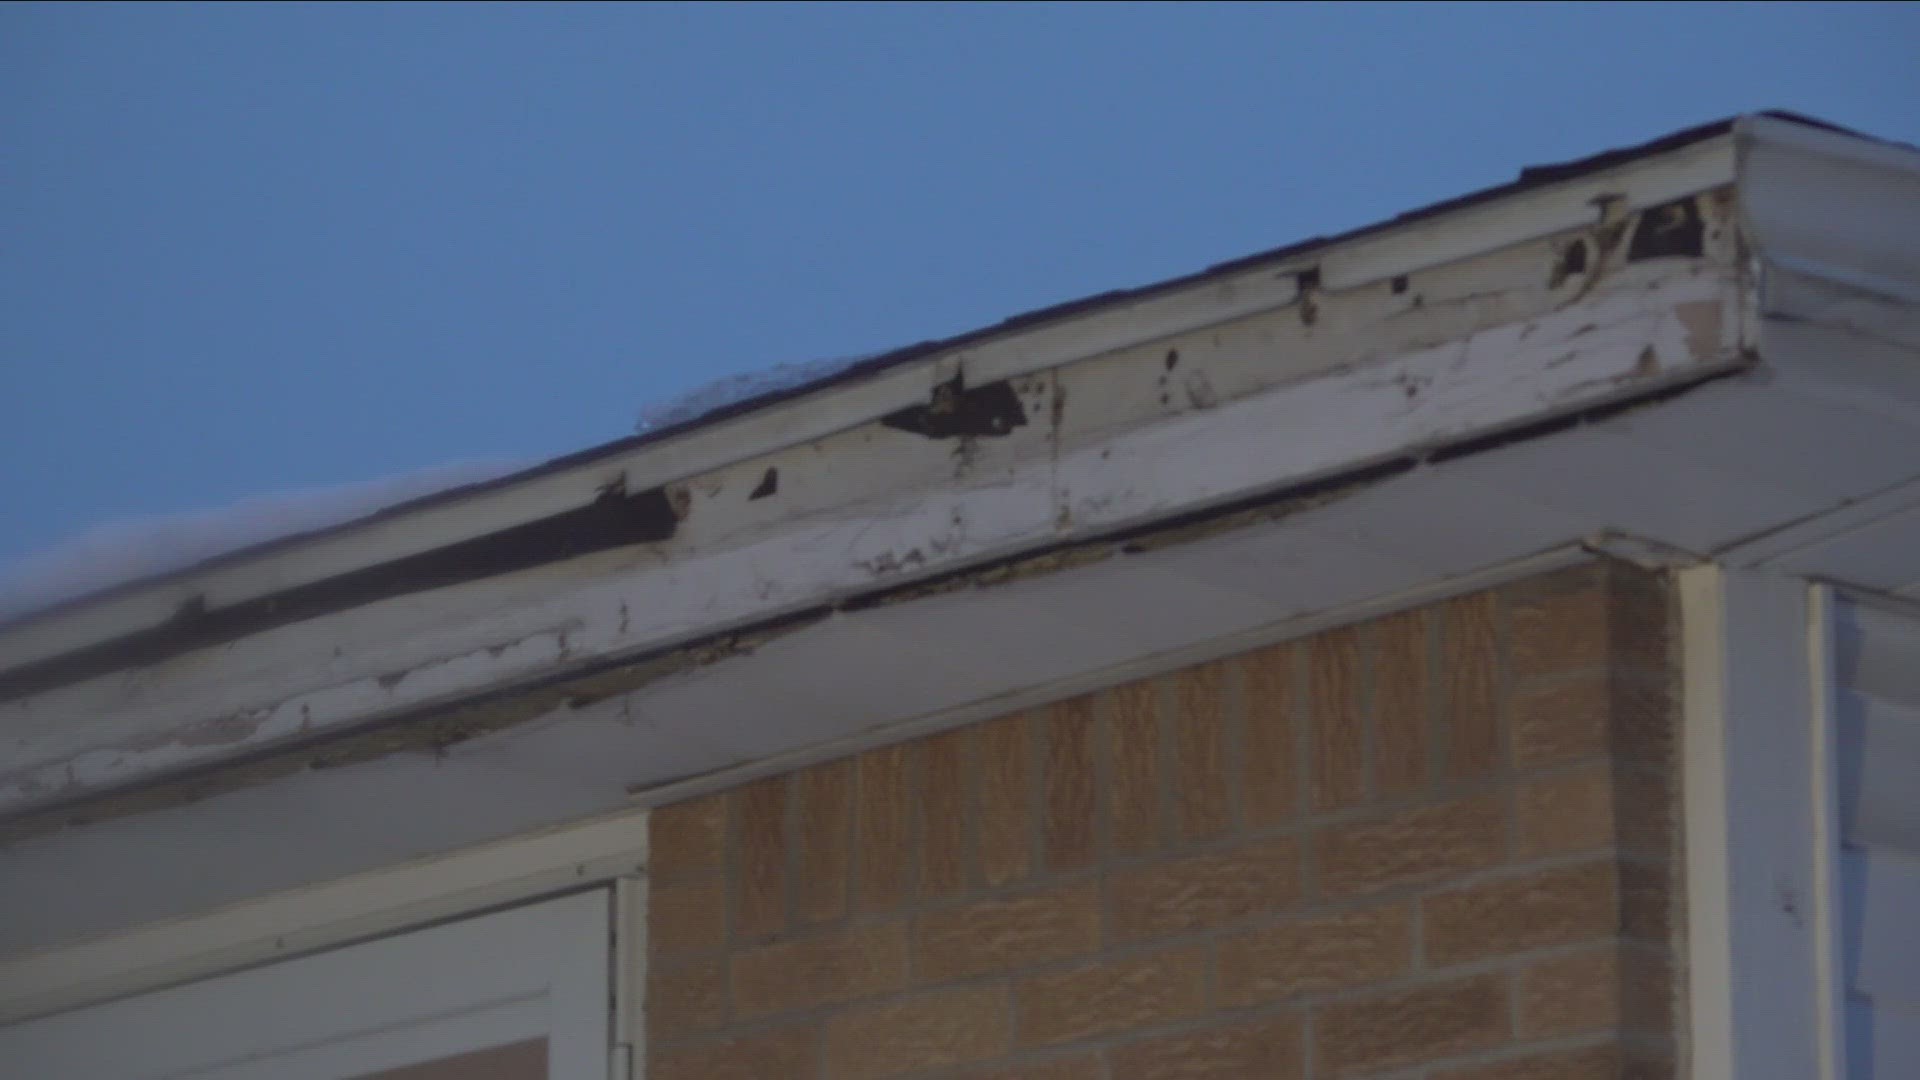 The freeze and thaw cycle adds weight to the gutters, causing many to fall off houses.